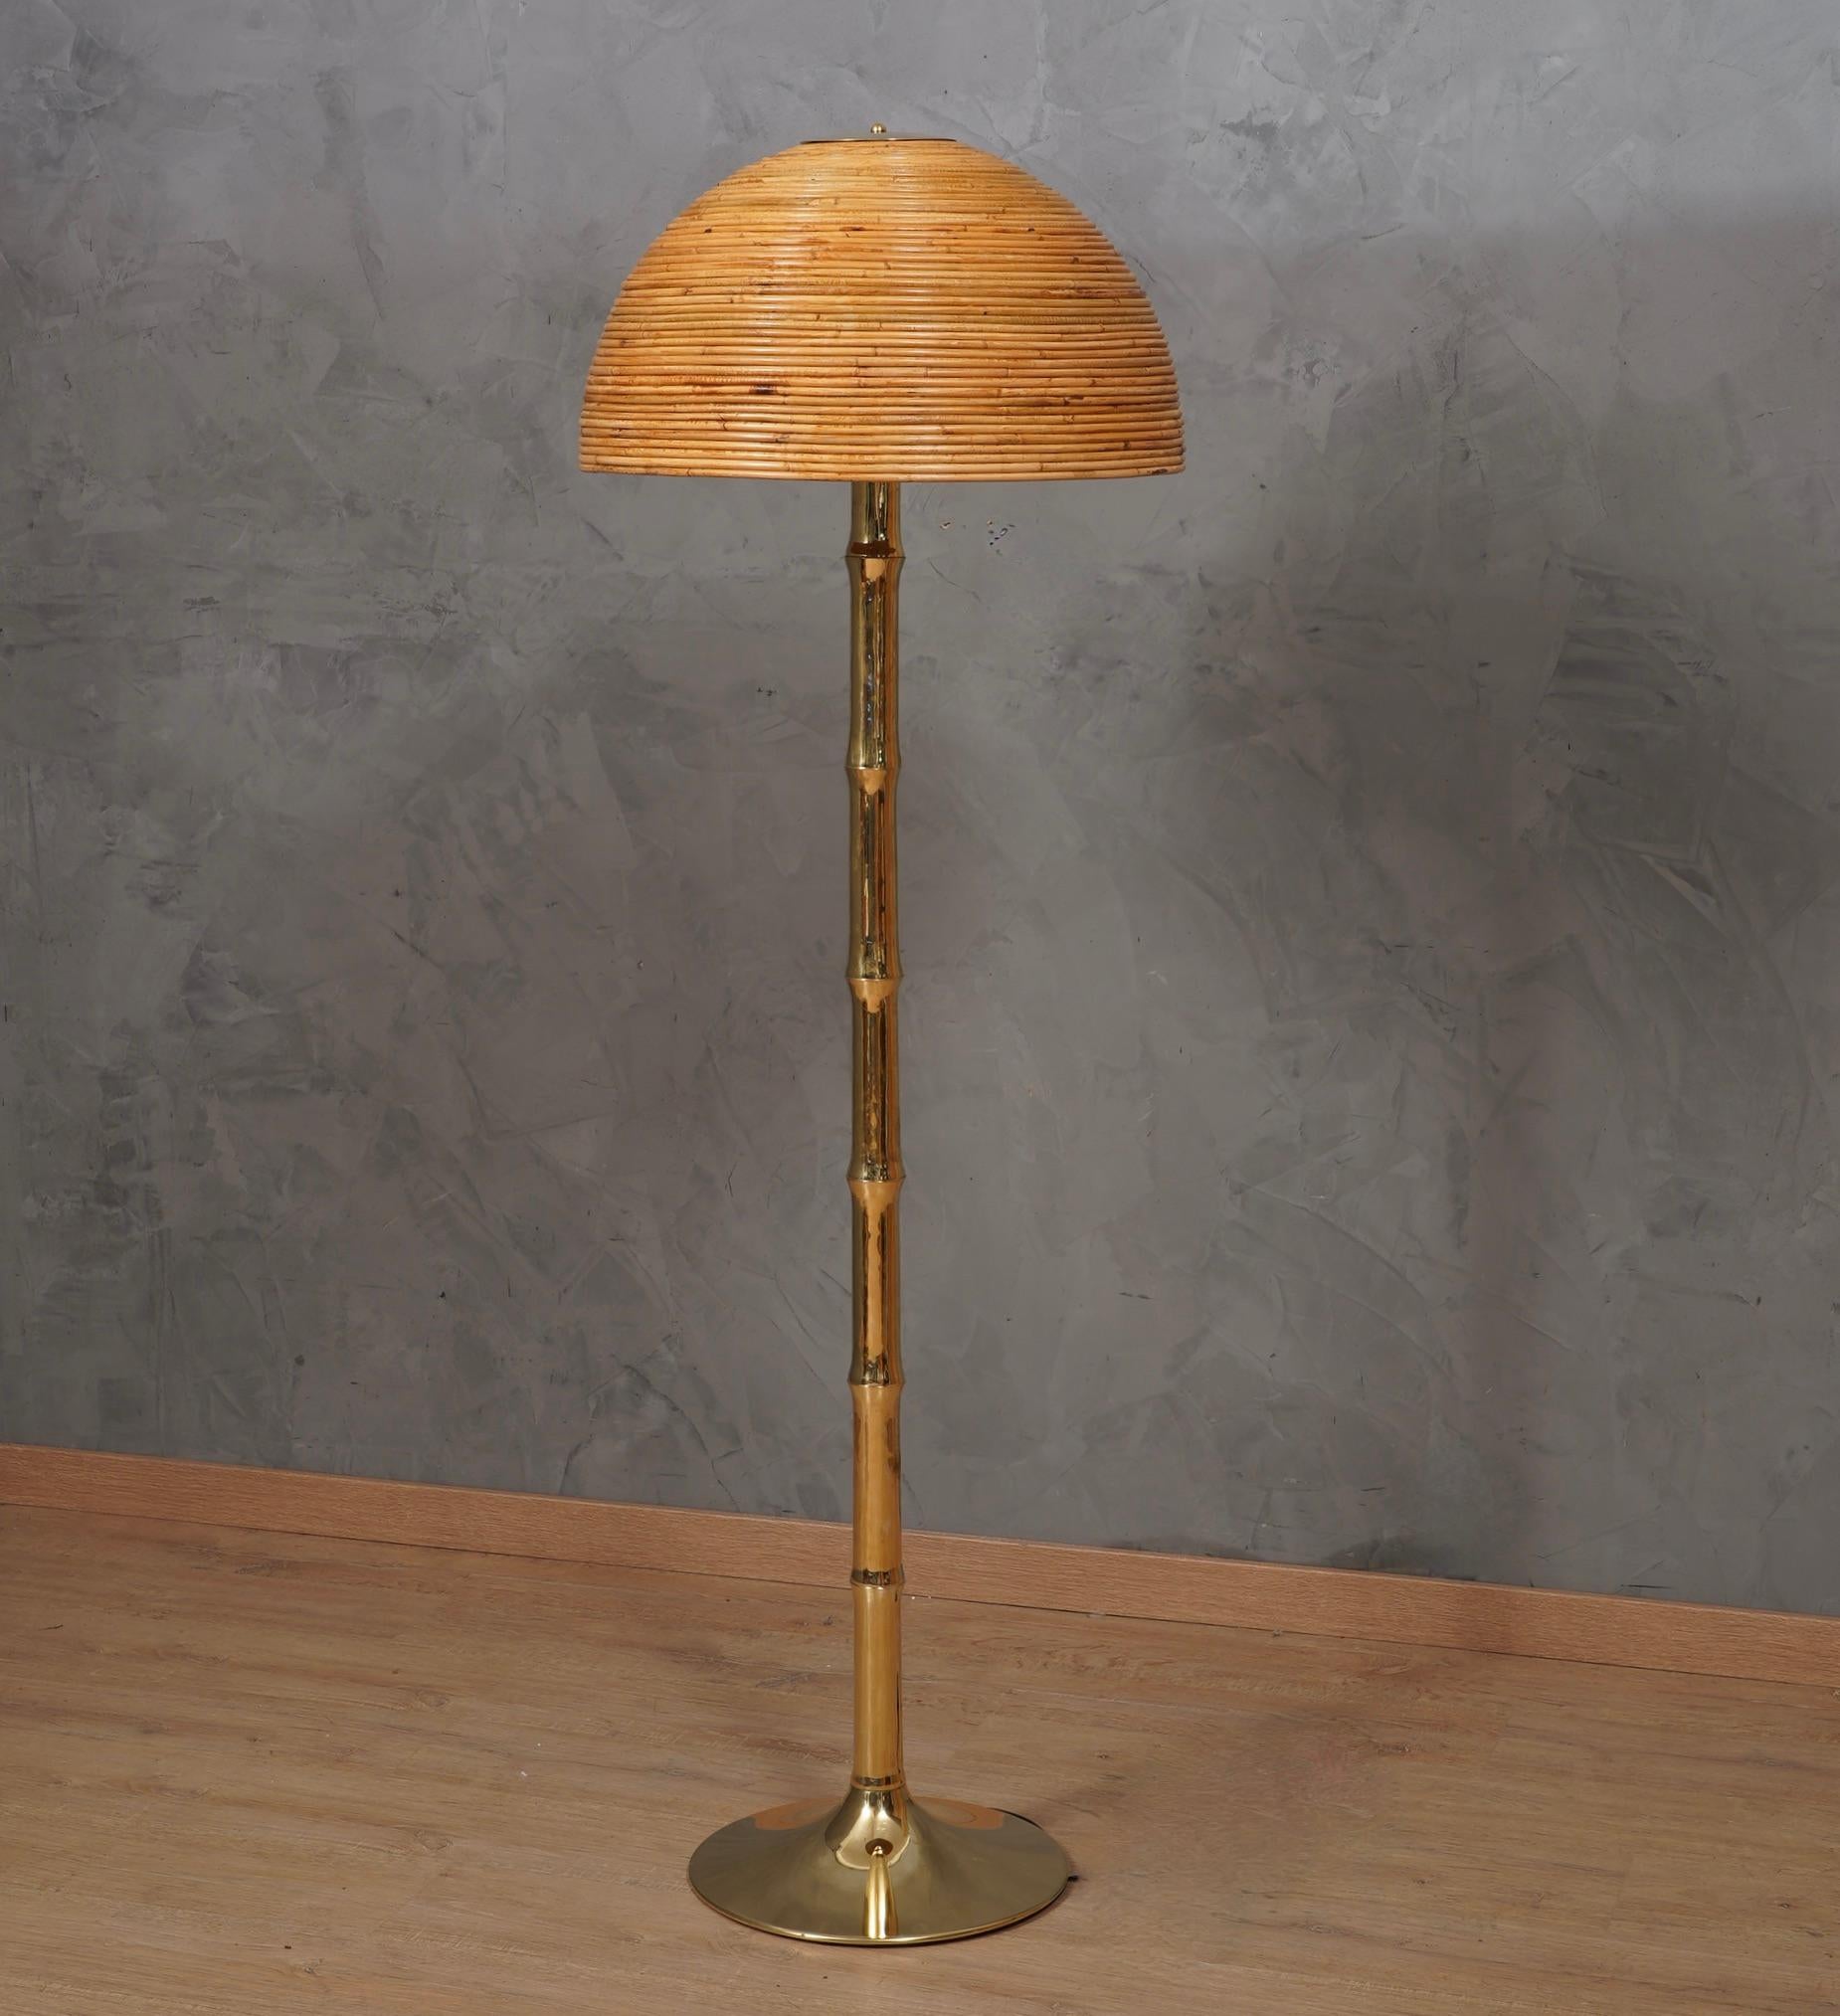 Exquisite piece of furniture that exemplifies timeless design and exceptional craftsmanship. The floor lamp is very linear and will decorate your home space perfectly. Aesthetically the floor lamp as a whole is wonderful.

The floor lamp is composed